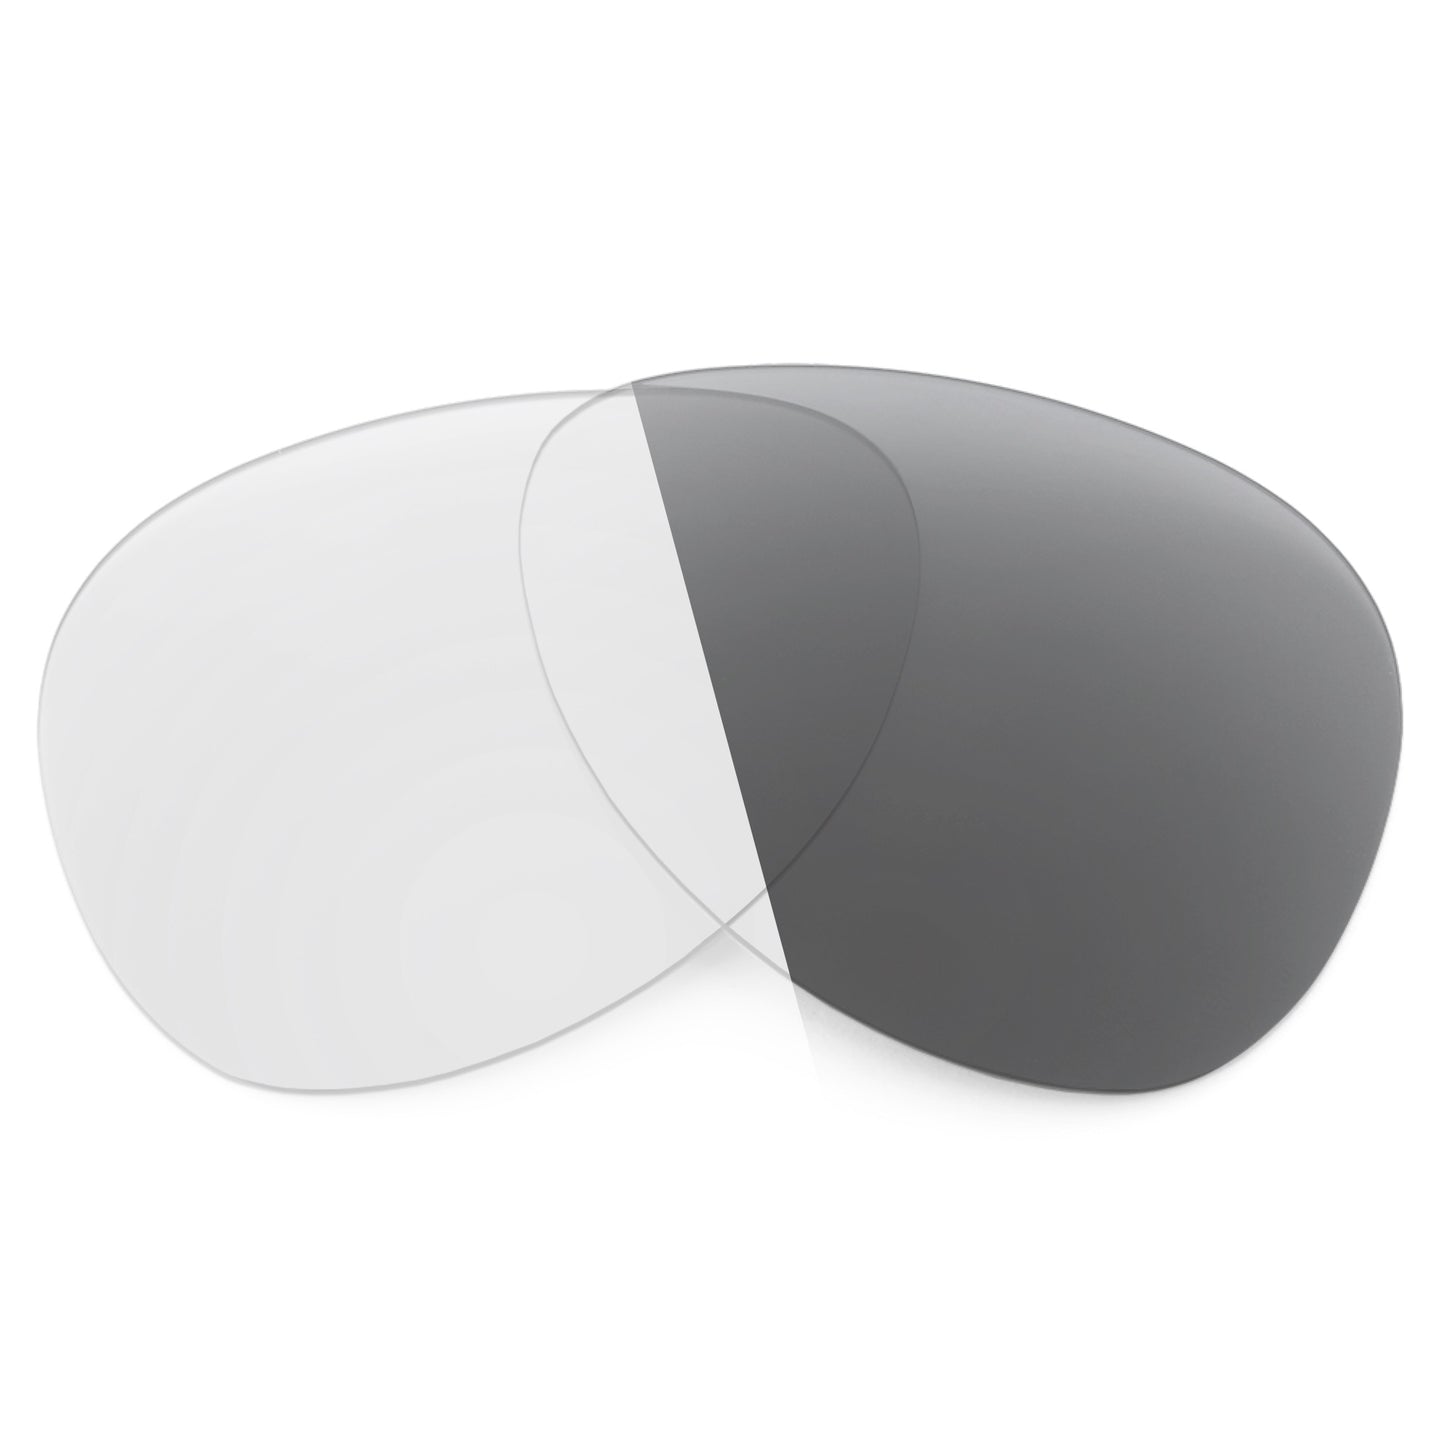 Revant replacement lenses for Ray-Ban RB3549 58mm Non-Polarized Adapt Gray Photochromic